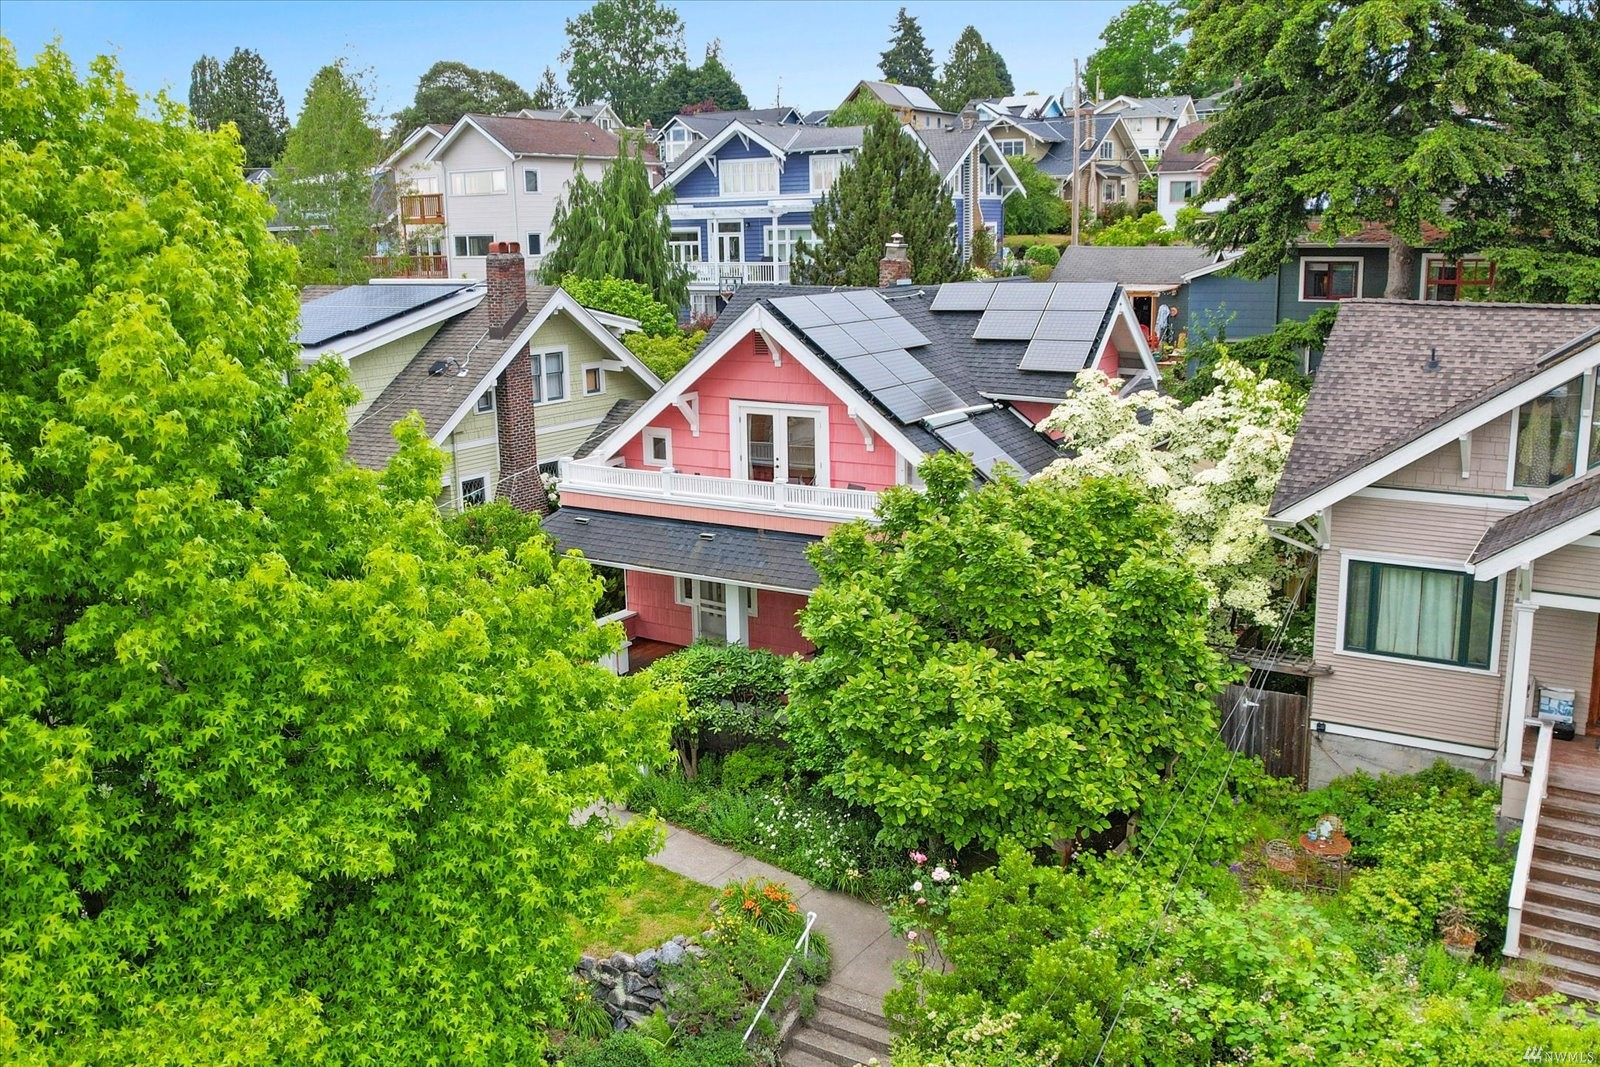 Aerial view of 6506 2nd Ave NW Seattle